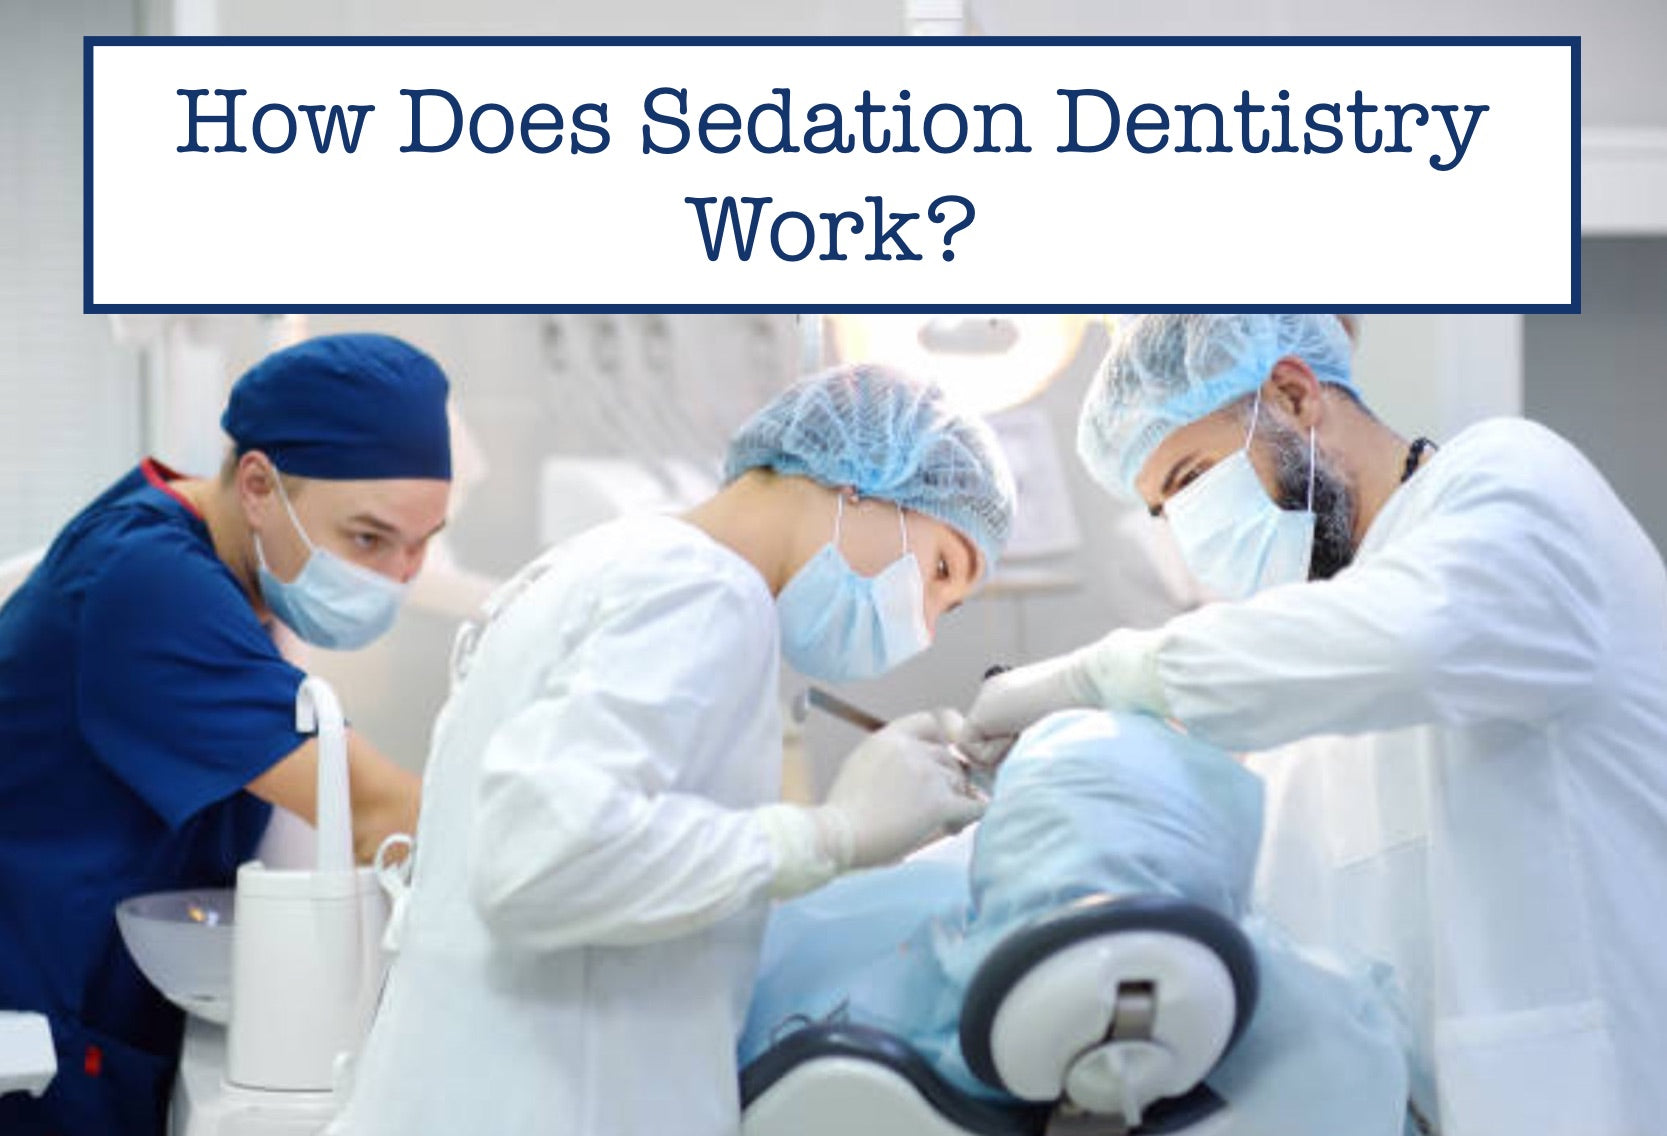 How Does Sedation Dentistry Work?